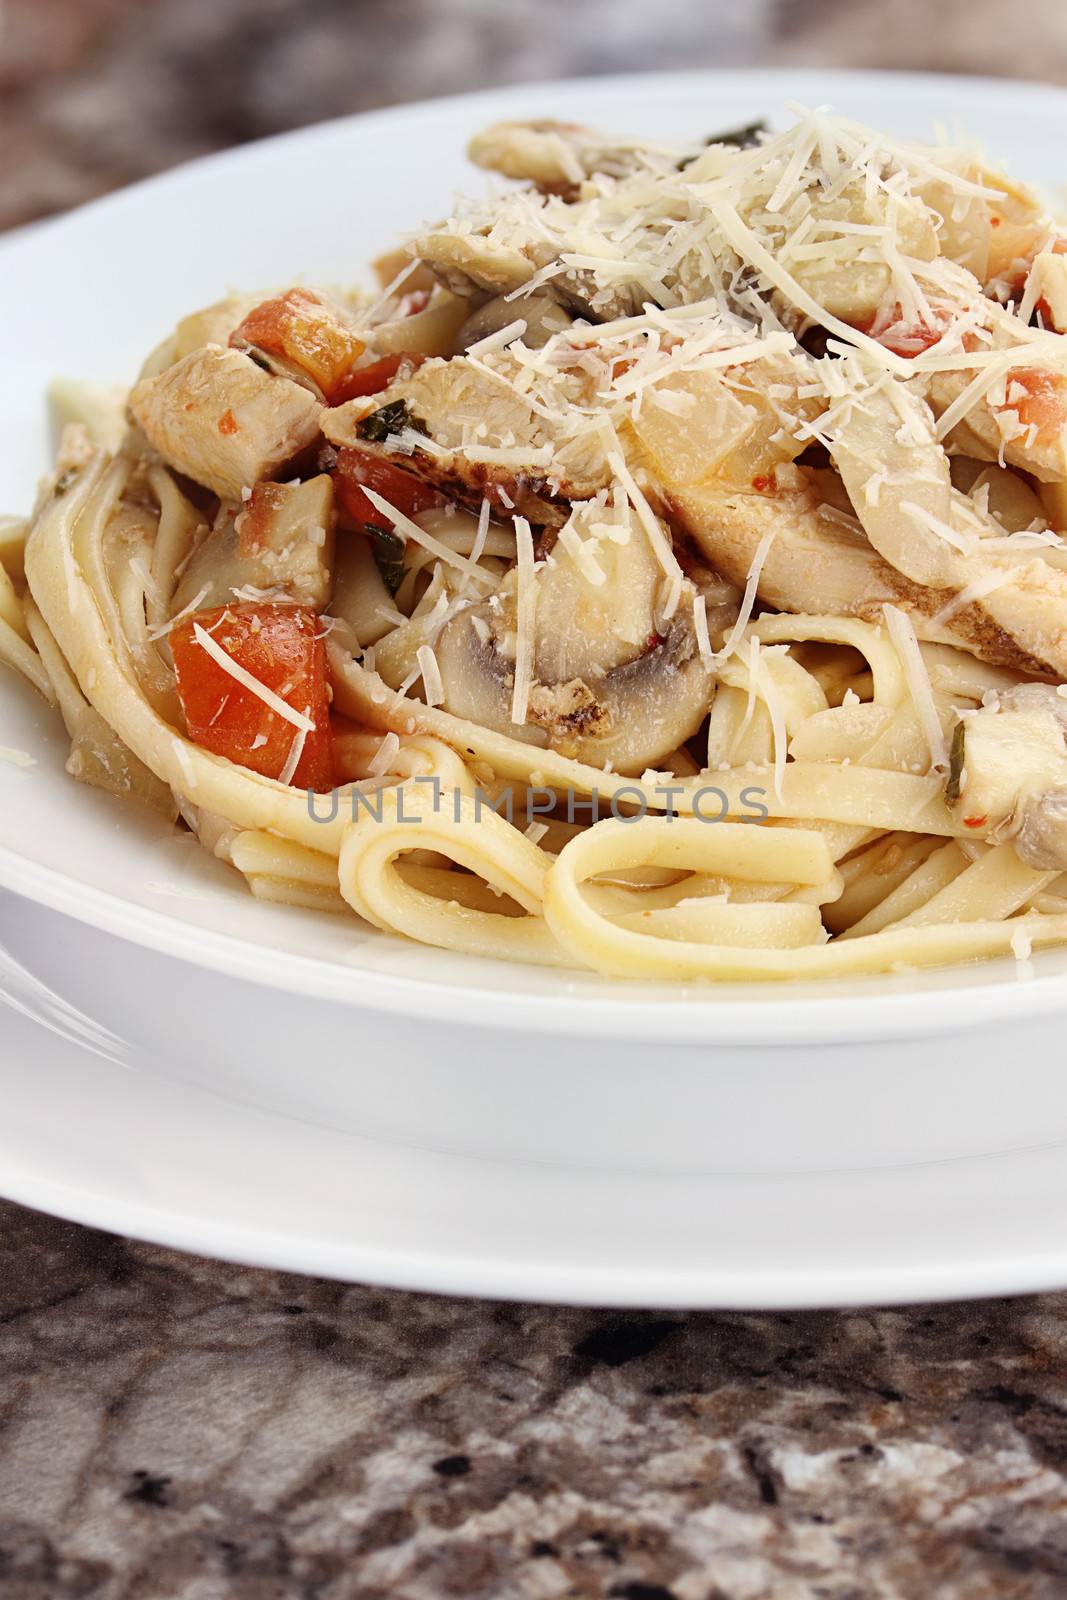 Chicken linguine with grilled chicken, tomatoes, mushrooms and freshly grated parmesan cheese.